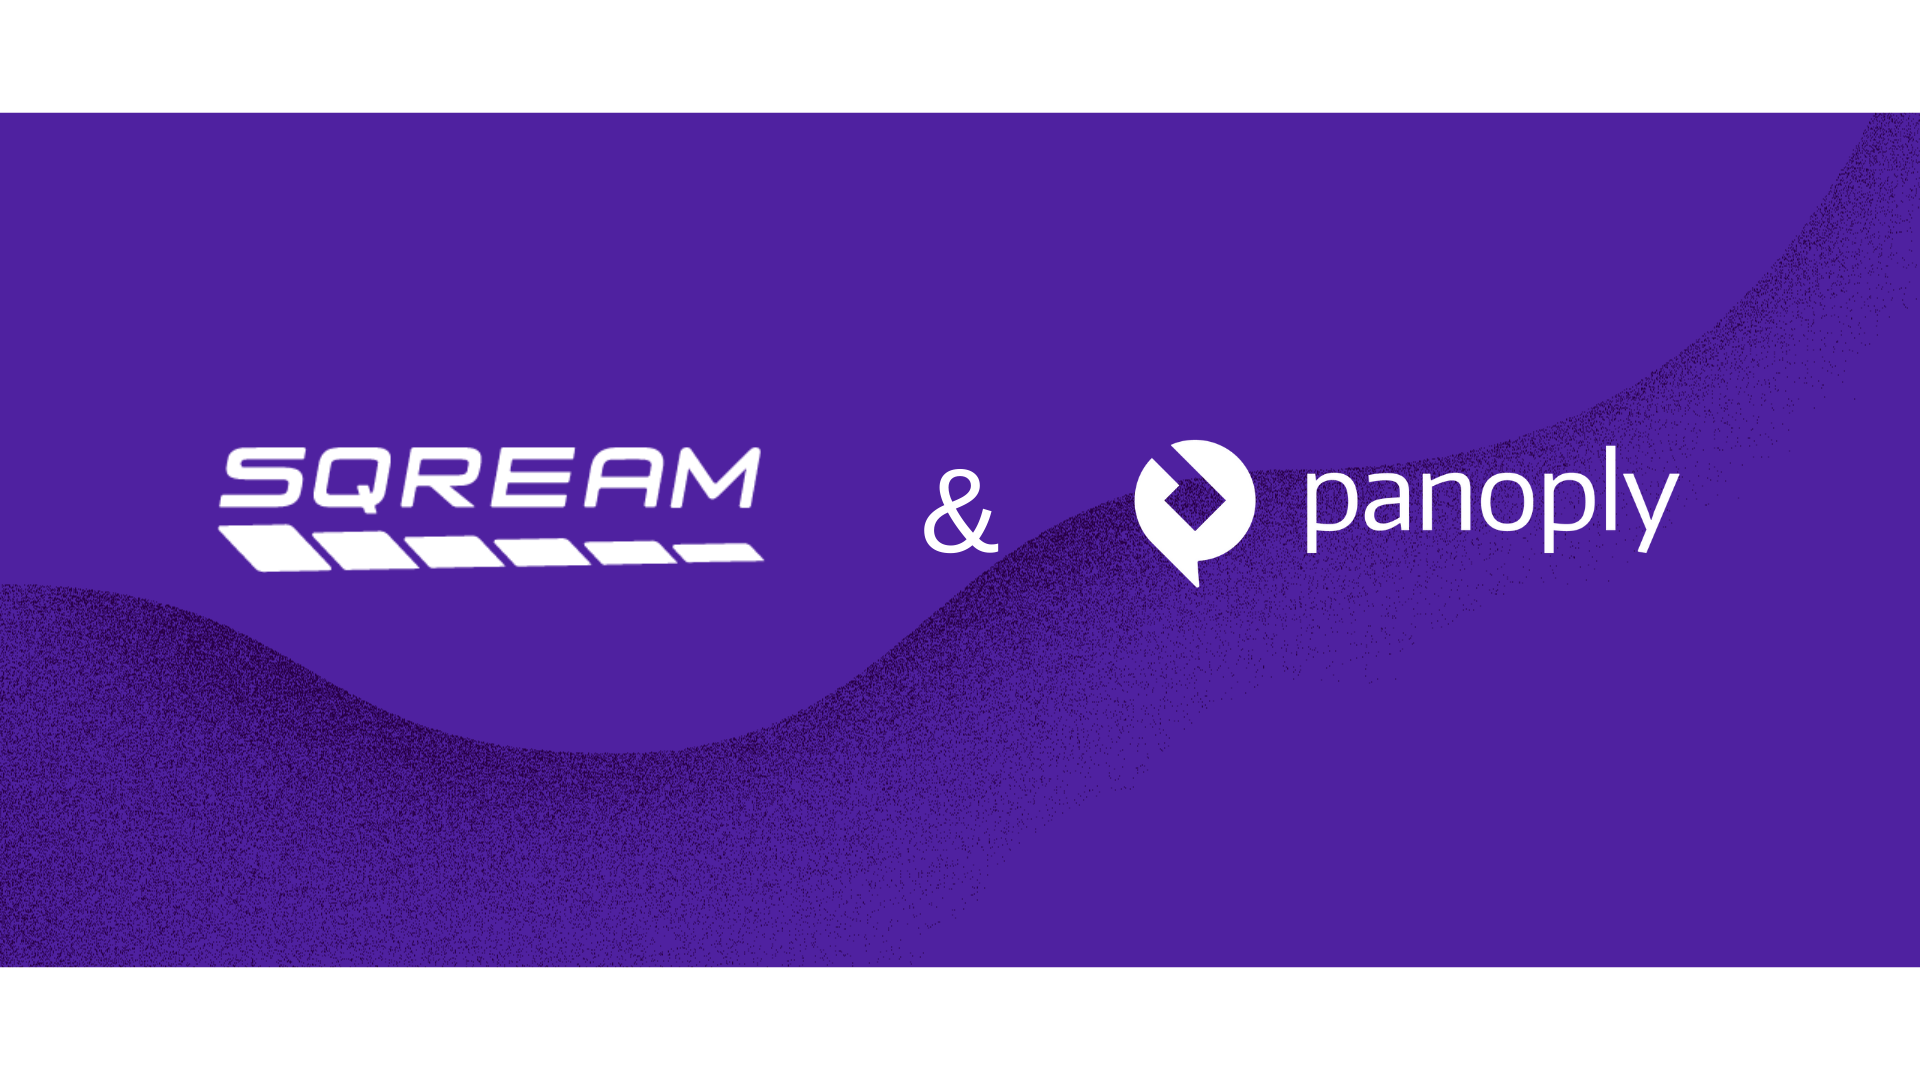 Panoply has joined the SQream data family!